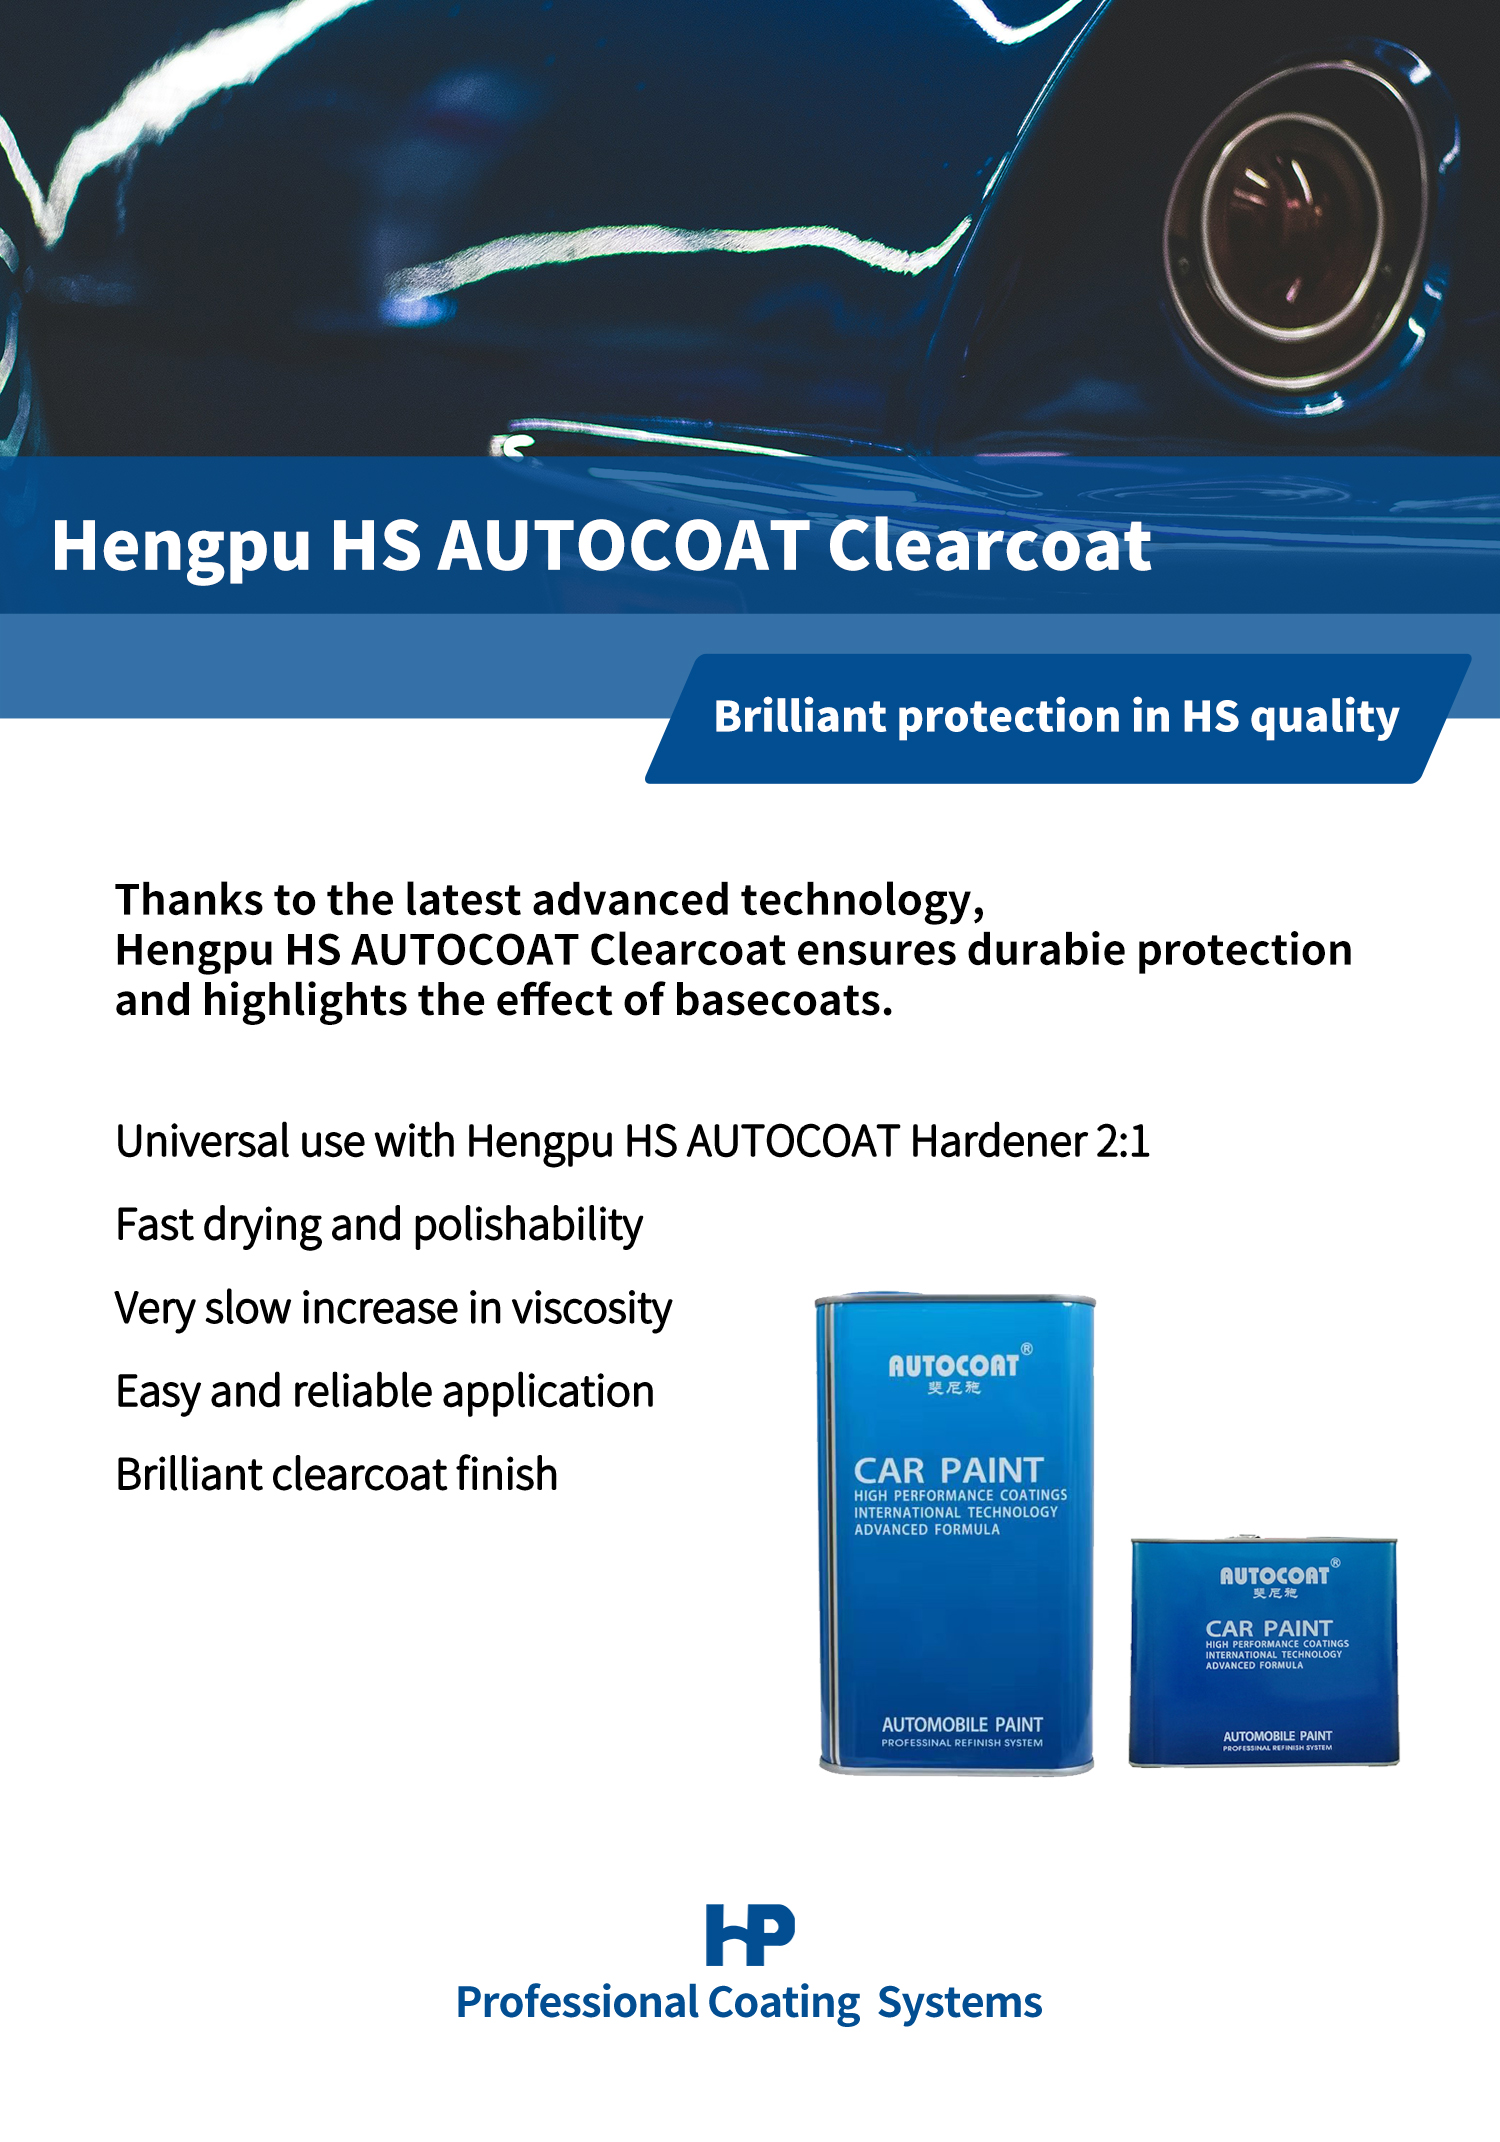 High Application High Gloss Auto Paint Easy Operation High Plumpness Car Paint FILRE HS Highlighting Clearcoat